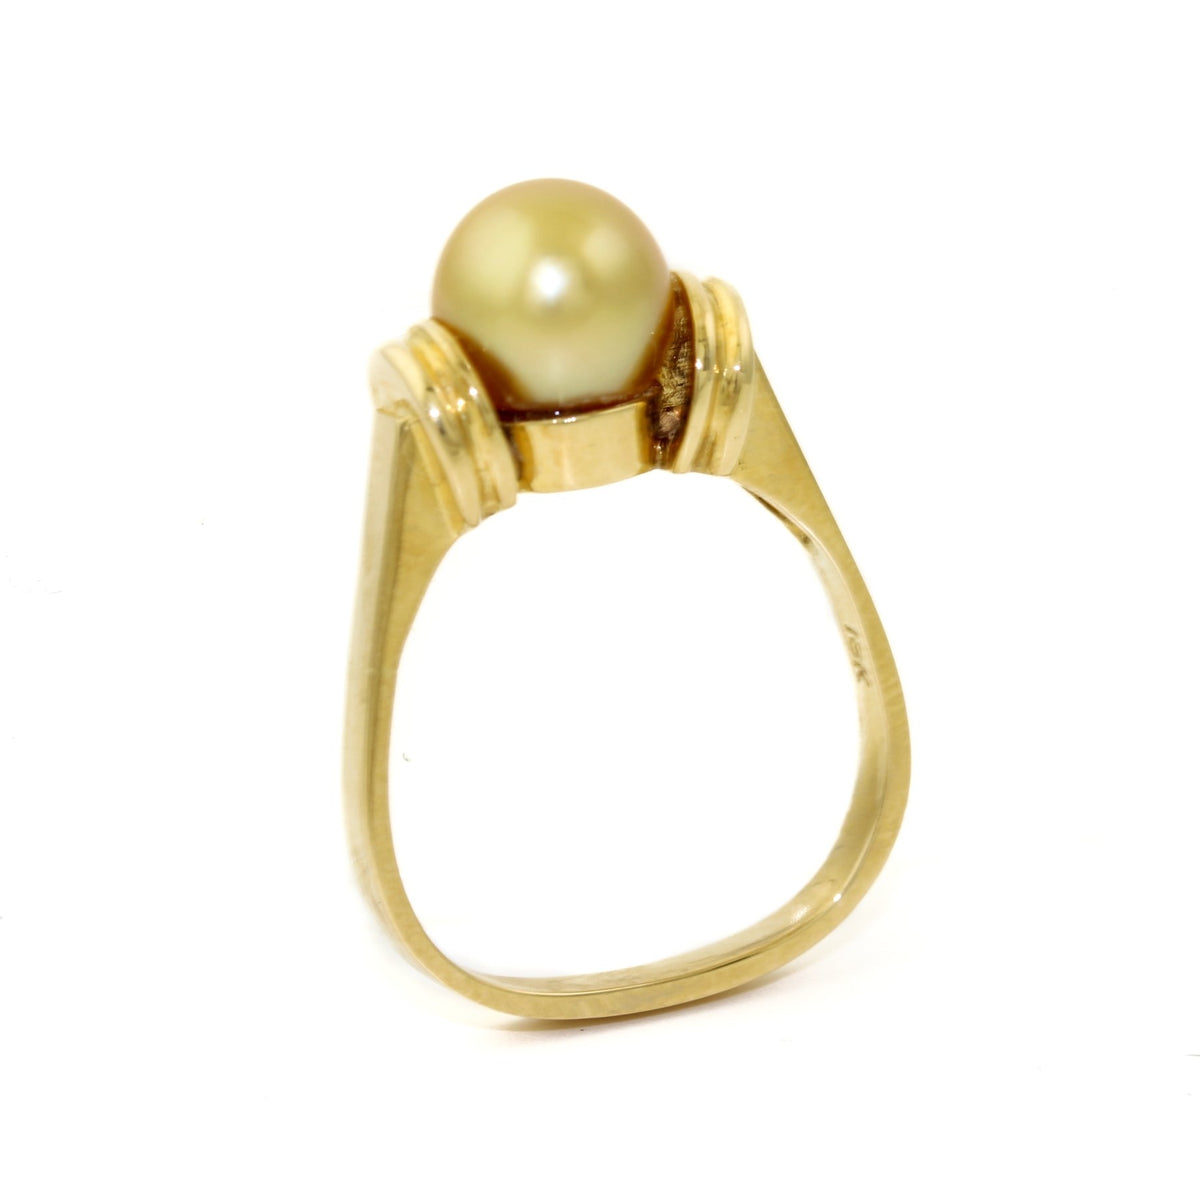 18K Gold South Sea Pearl Ring with Squared Band - Kingdom Jewelry